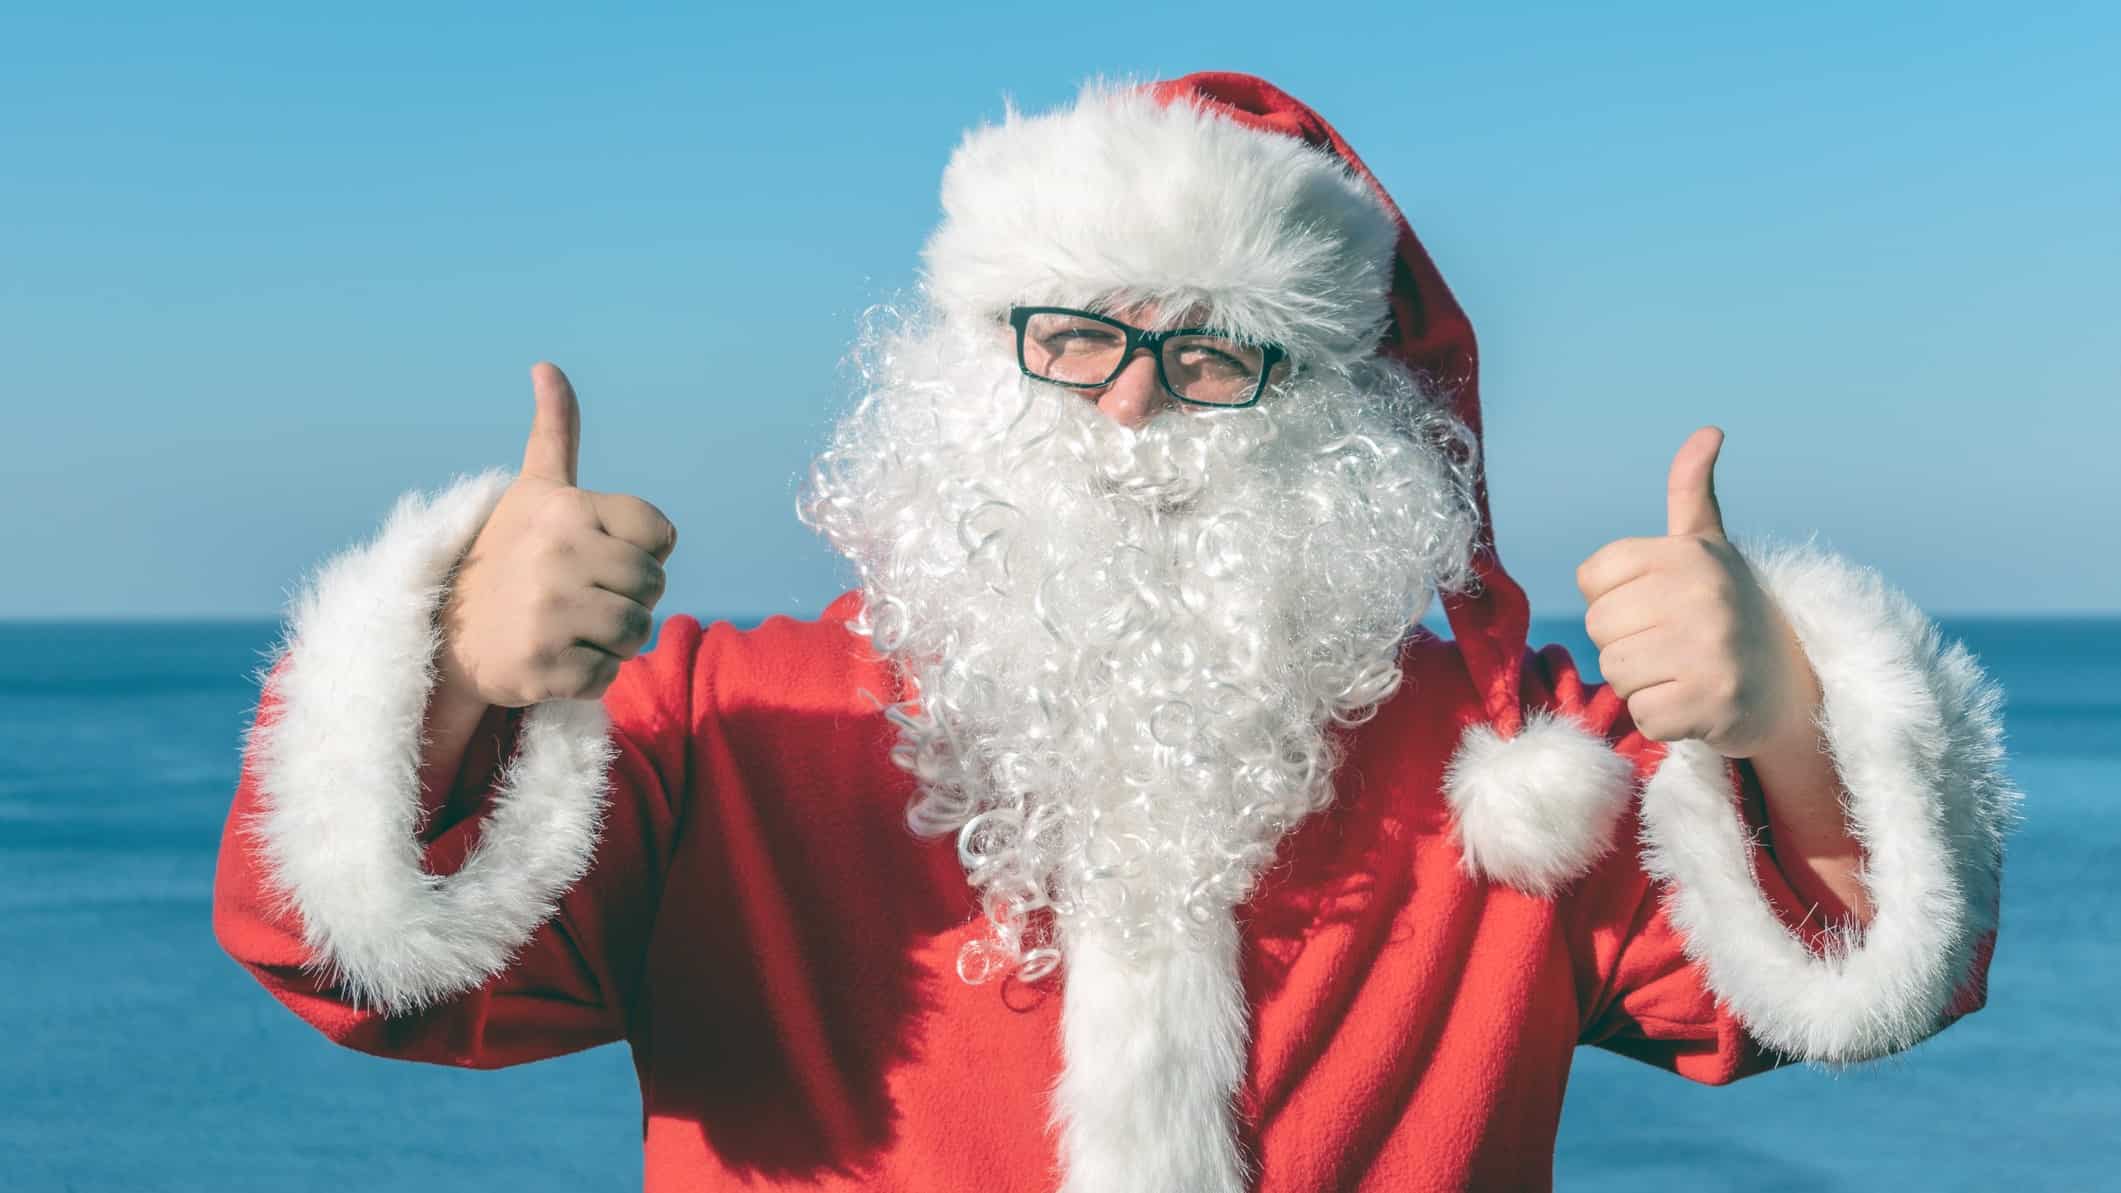 Santa at the beach gives a big thumbs up, indicating positive sentiment for the year ahead for ASX share prices